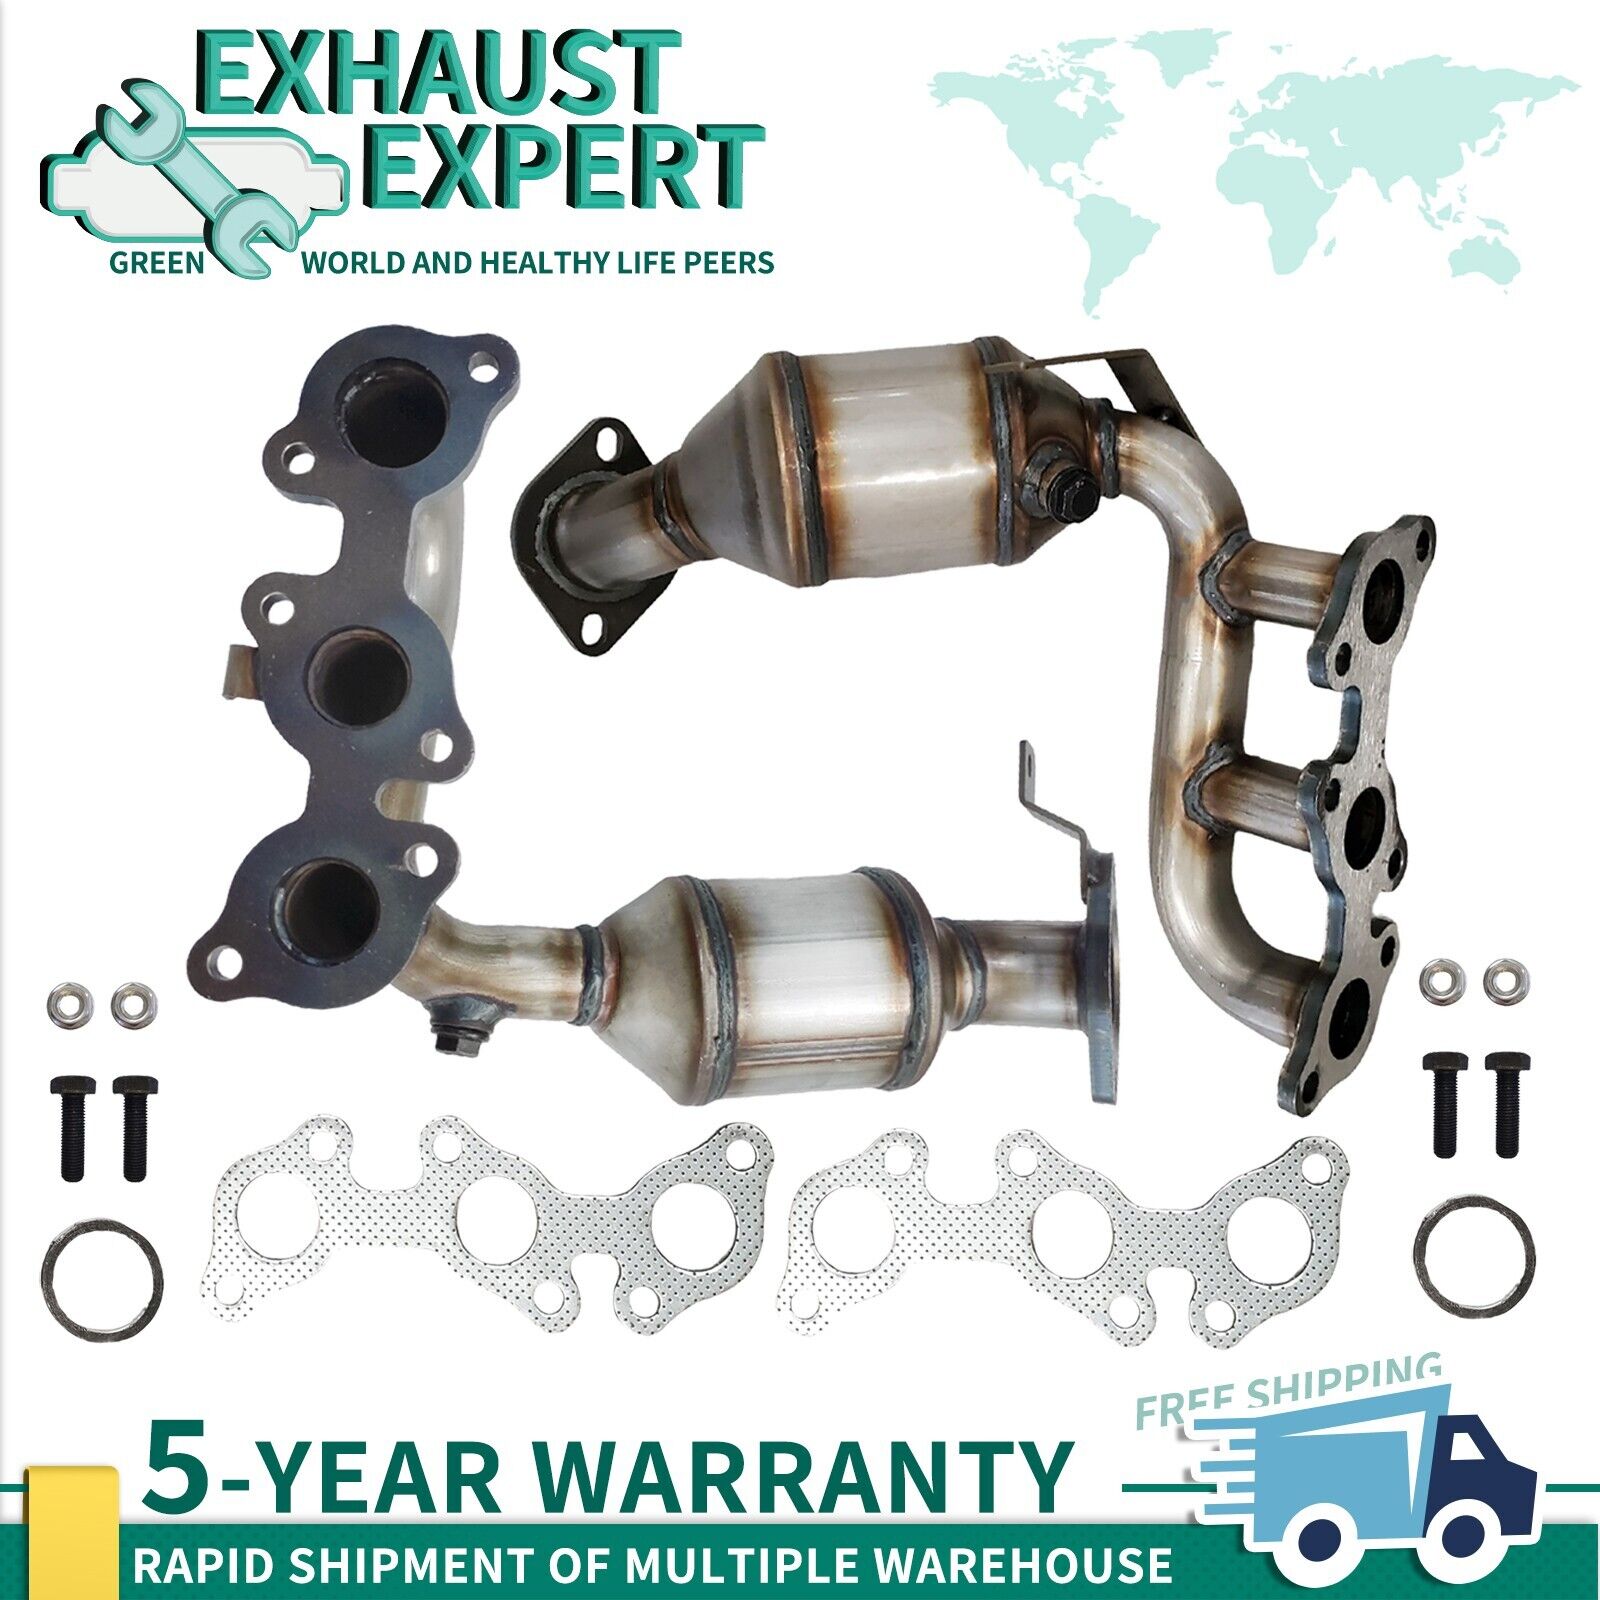 2x Catalytic Converter for 2004 2005 2006 Toyota Sienna 3.3L (FWD Only) EPA